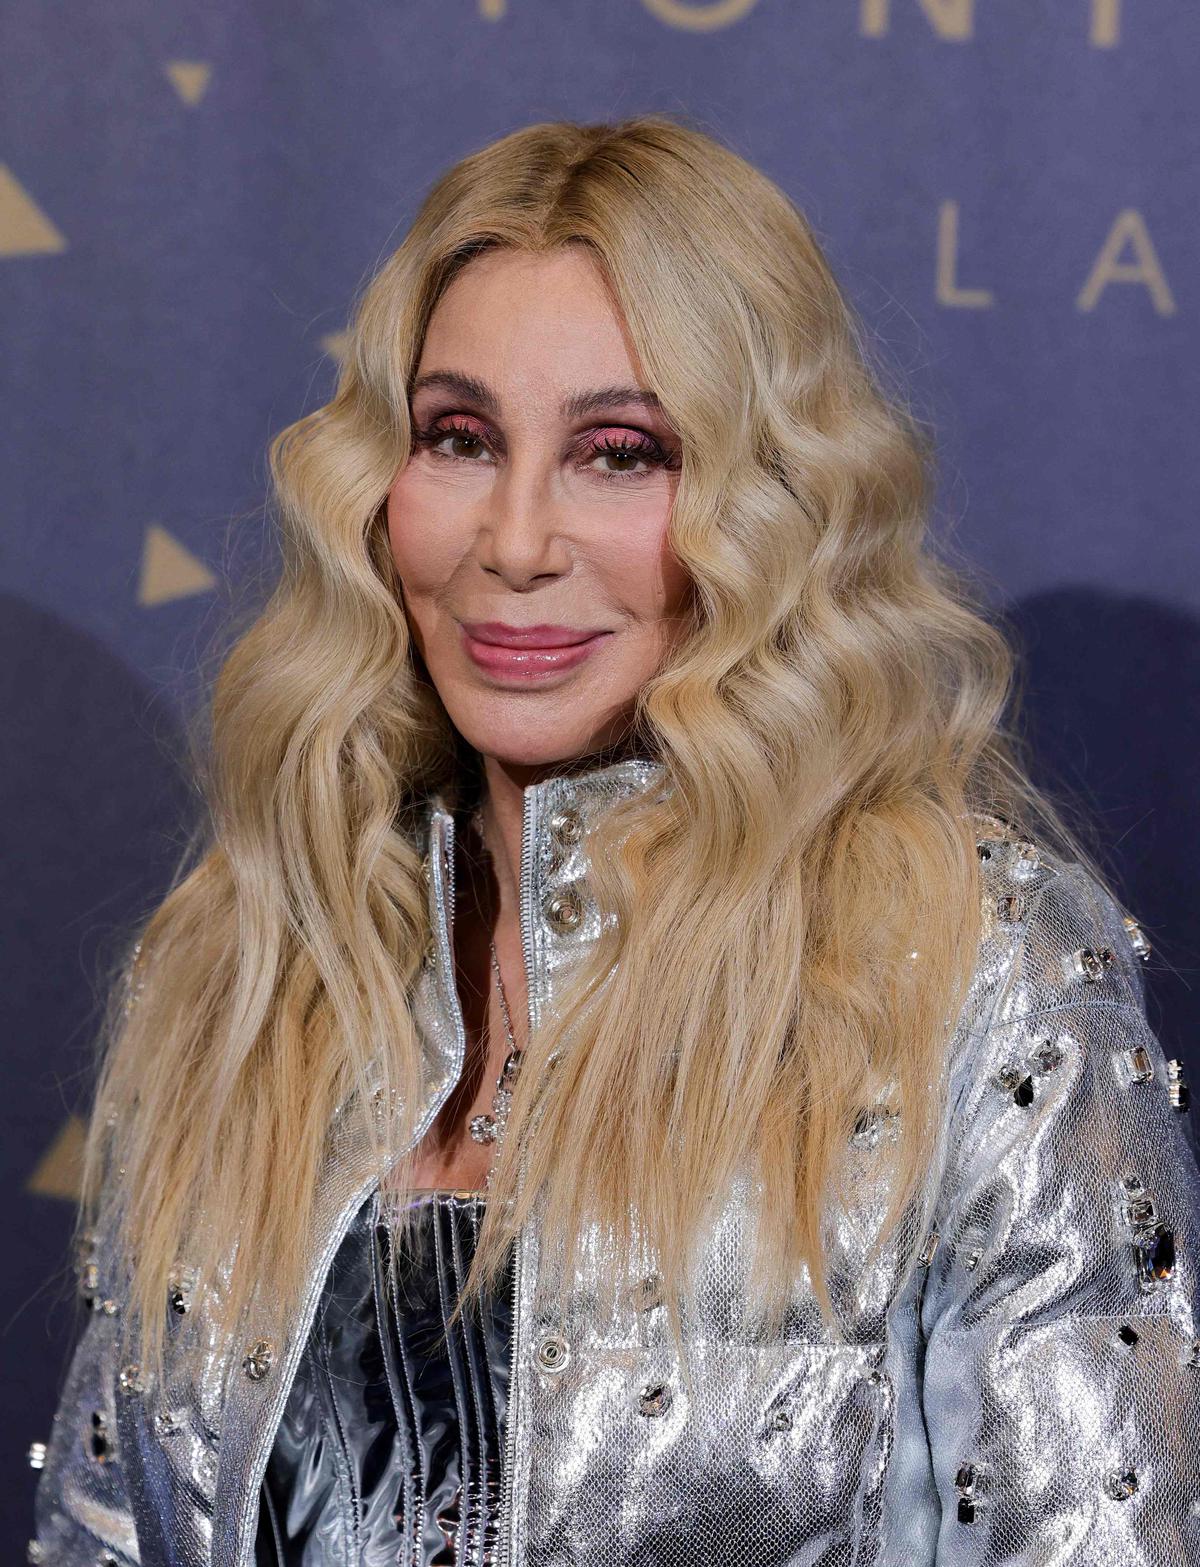 Cher’s Christmas track reaches the top spot